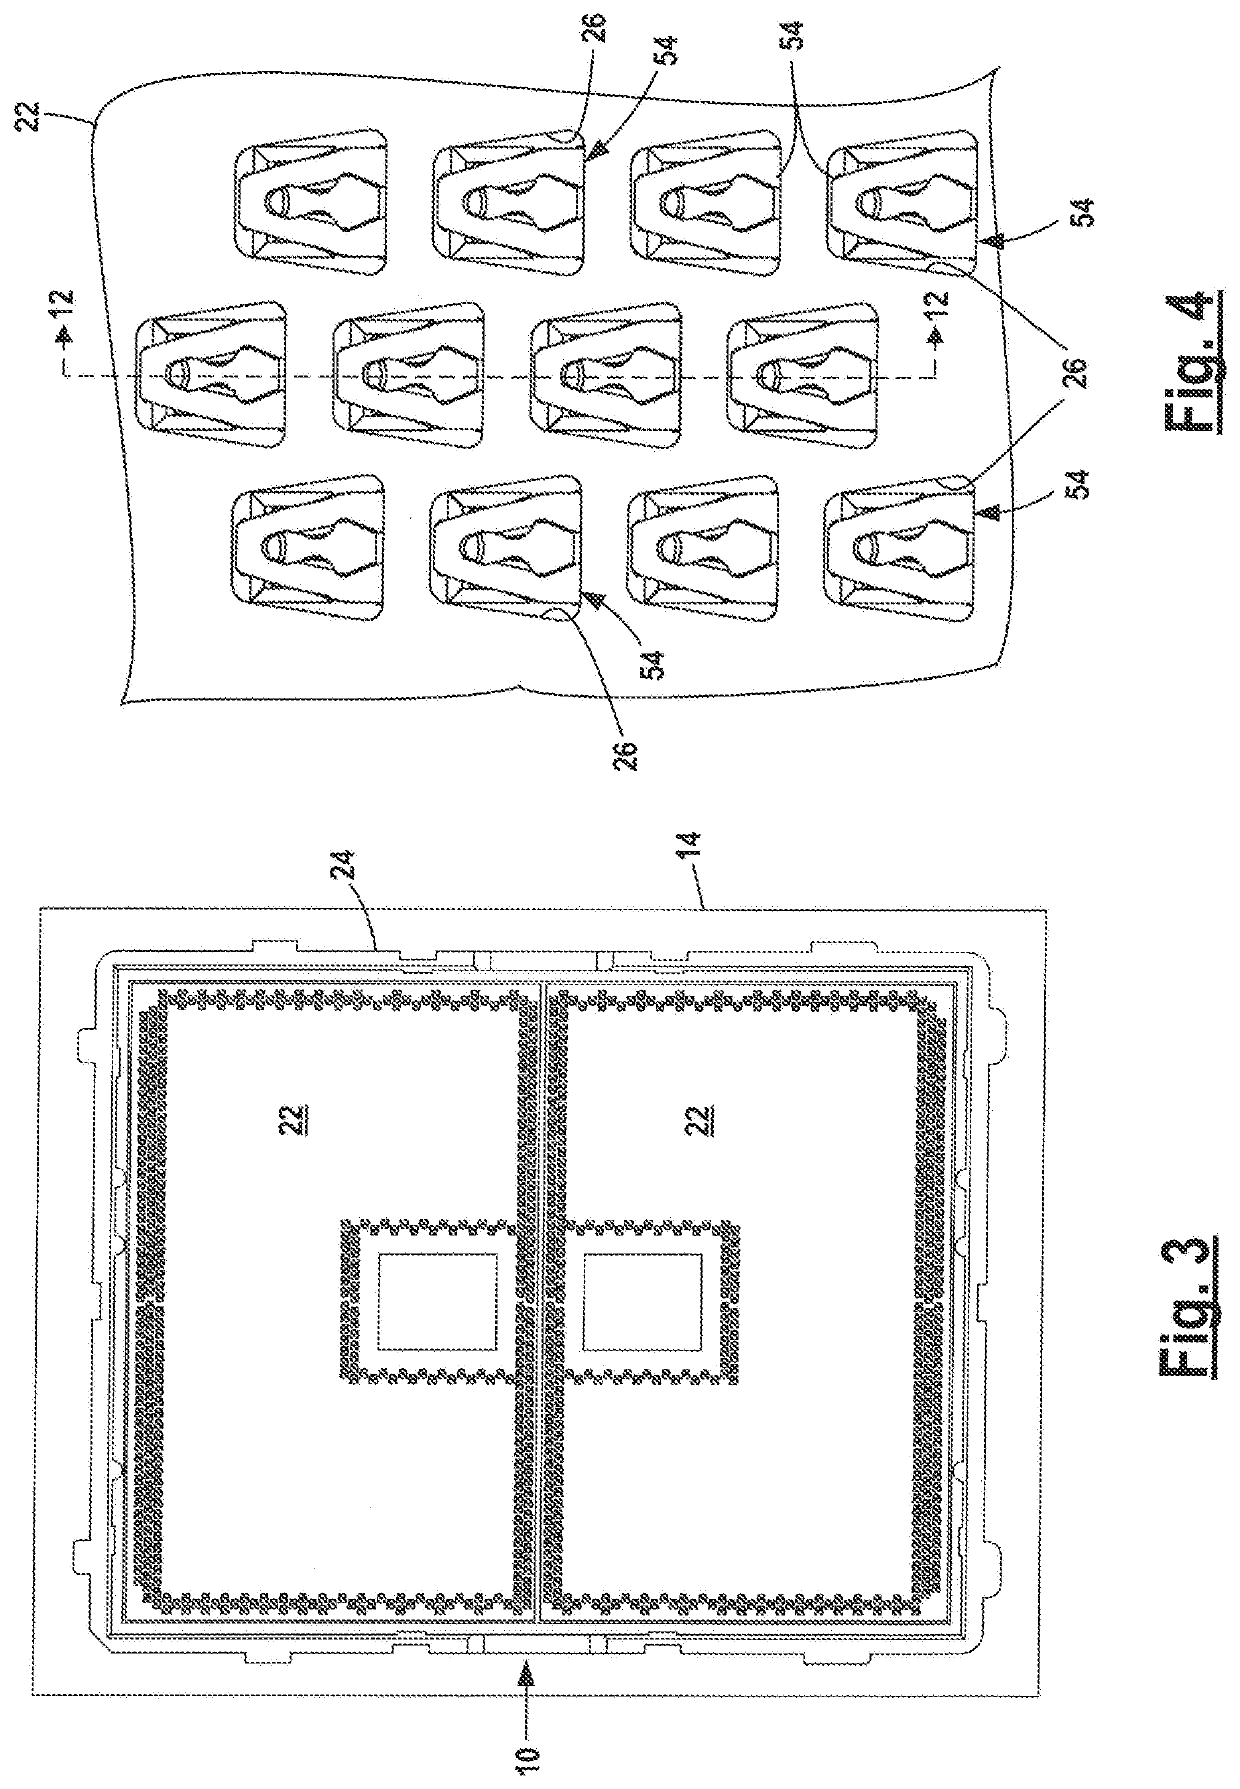 Interposer Assembly and Method